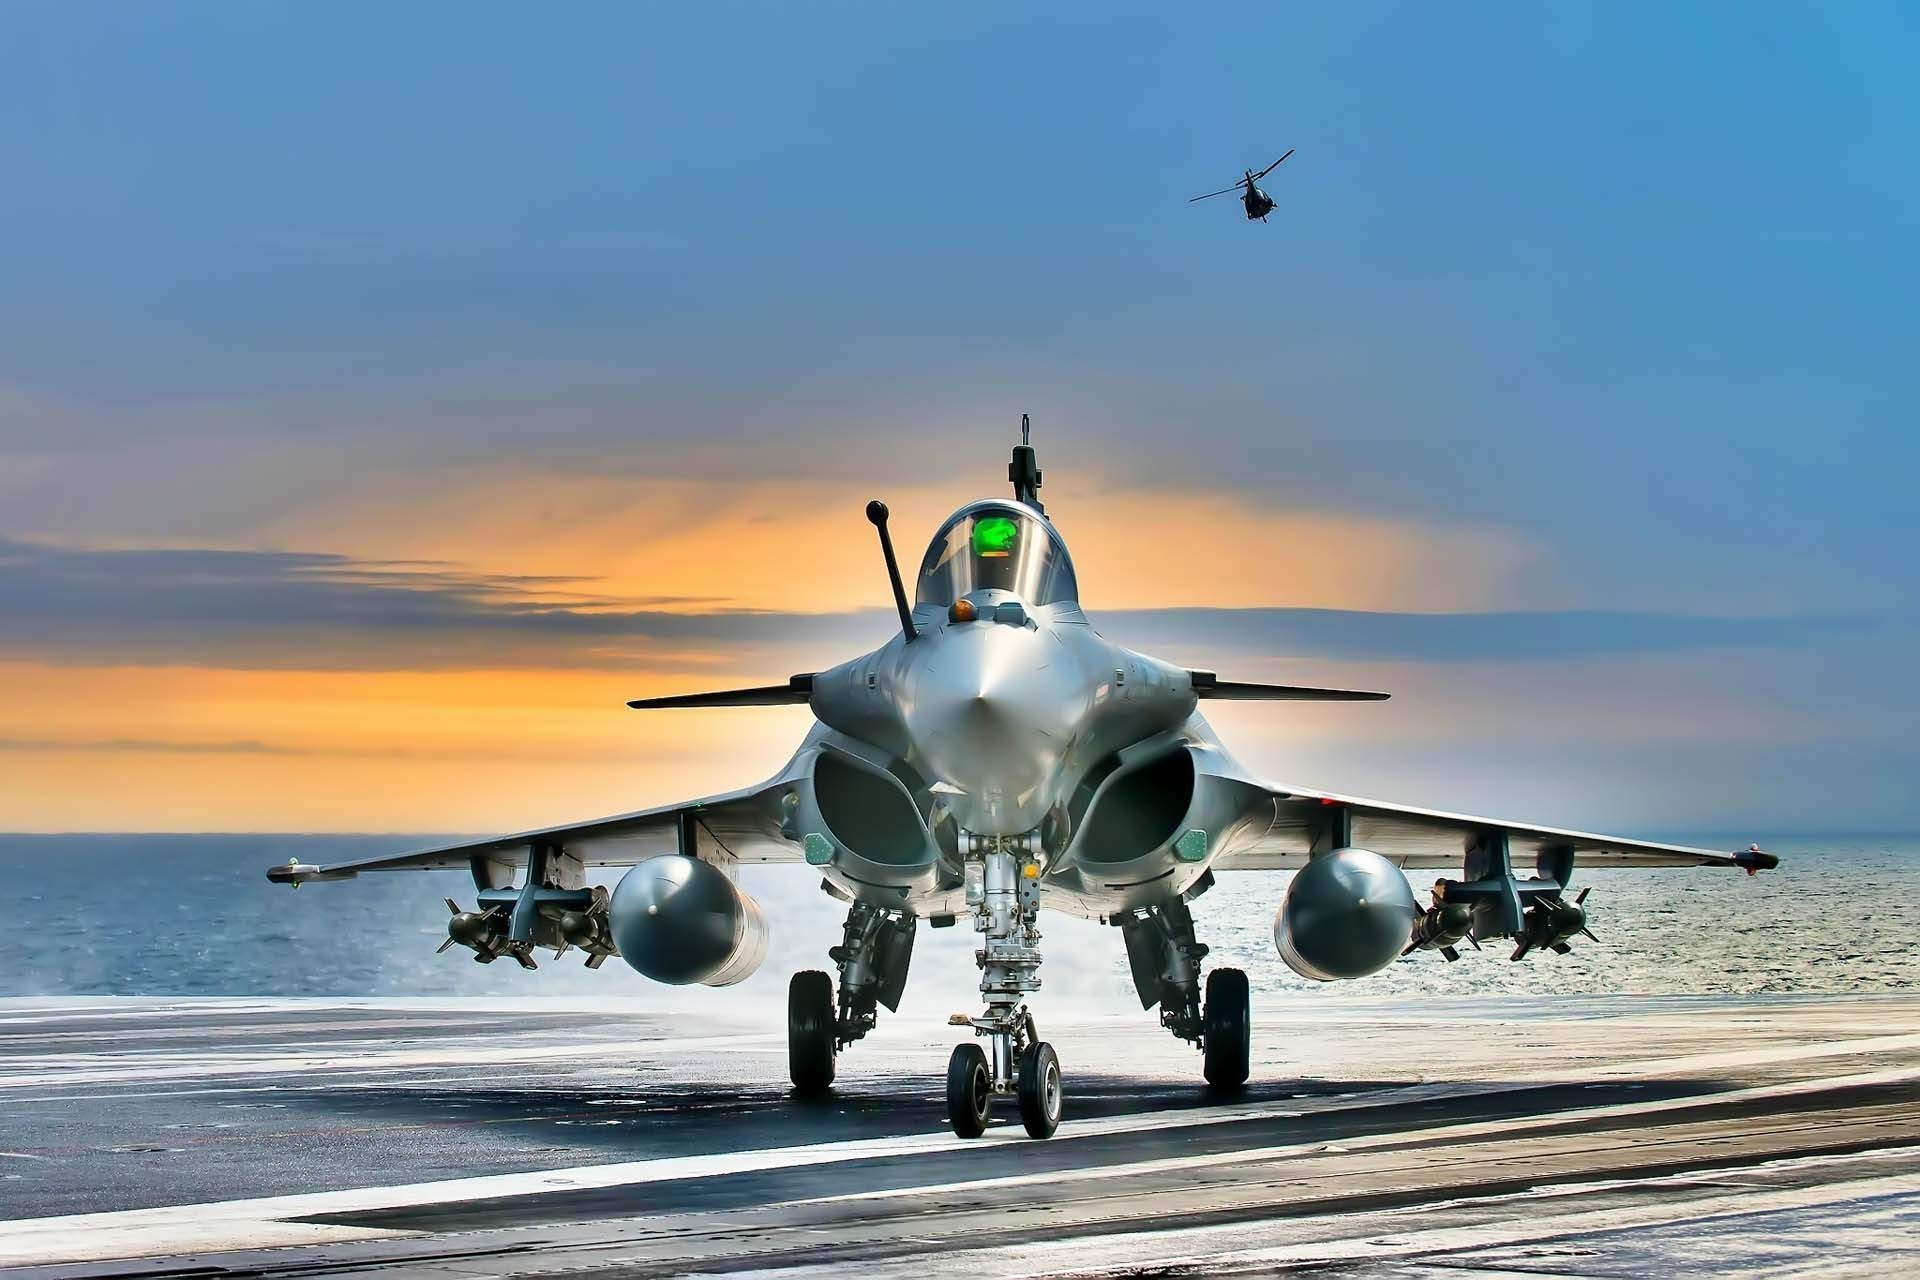 1920x1280 Rafale- the sexiest fighter aircraft today.on the deck of aircraft carrier  with sunset on the background